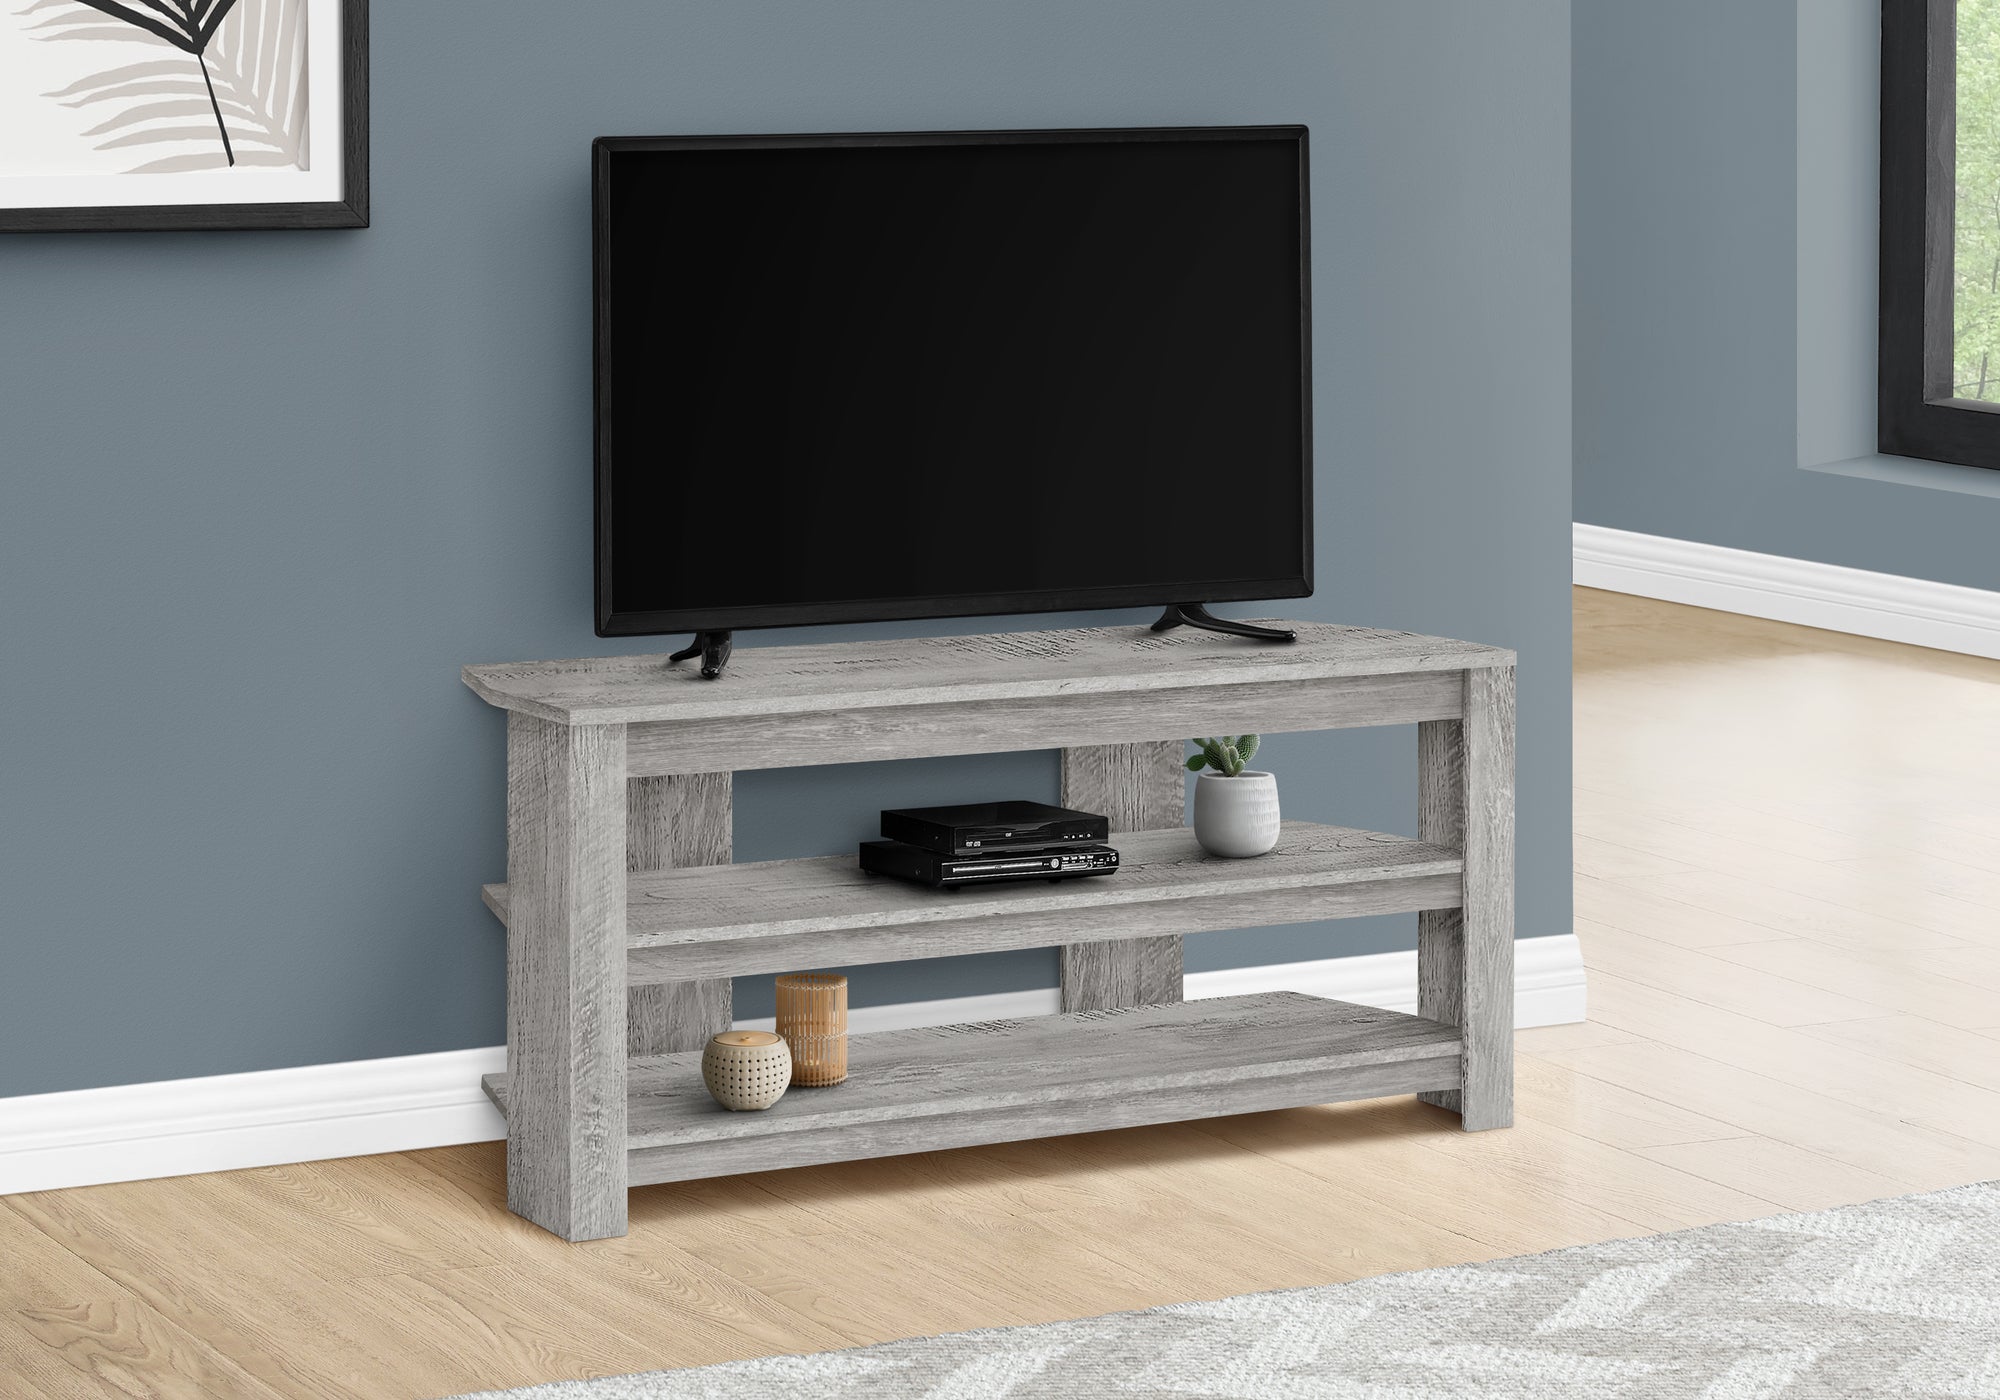 MN-492501    Tv Stand, 42 Inch, Console, Media Entertainment Center, Storage Cabinet, Living Room, Bedroom, Laminate, Industrial Grey, Contemporary, Industrial, Modern